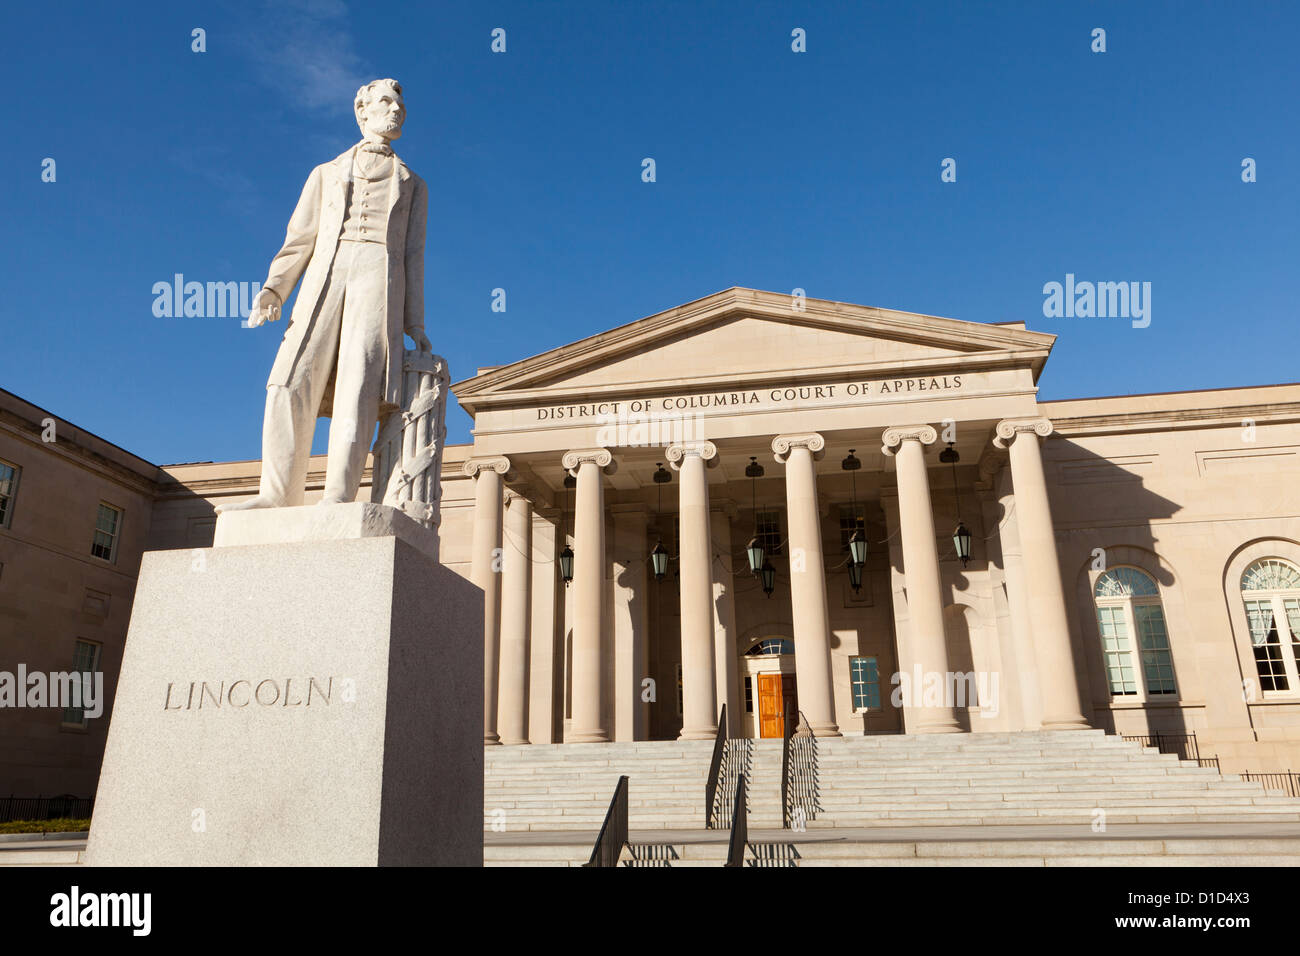 District Of Columbia Court Of Appeals   Washington, DC USA ...